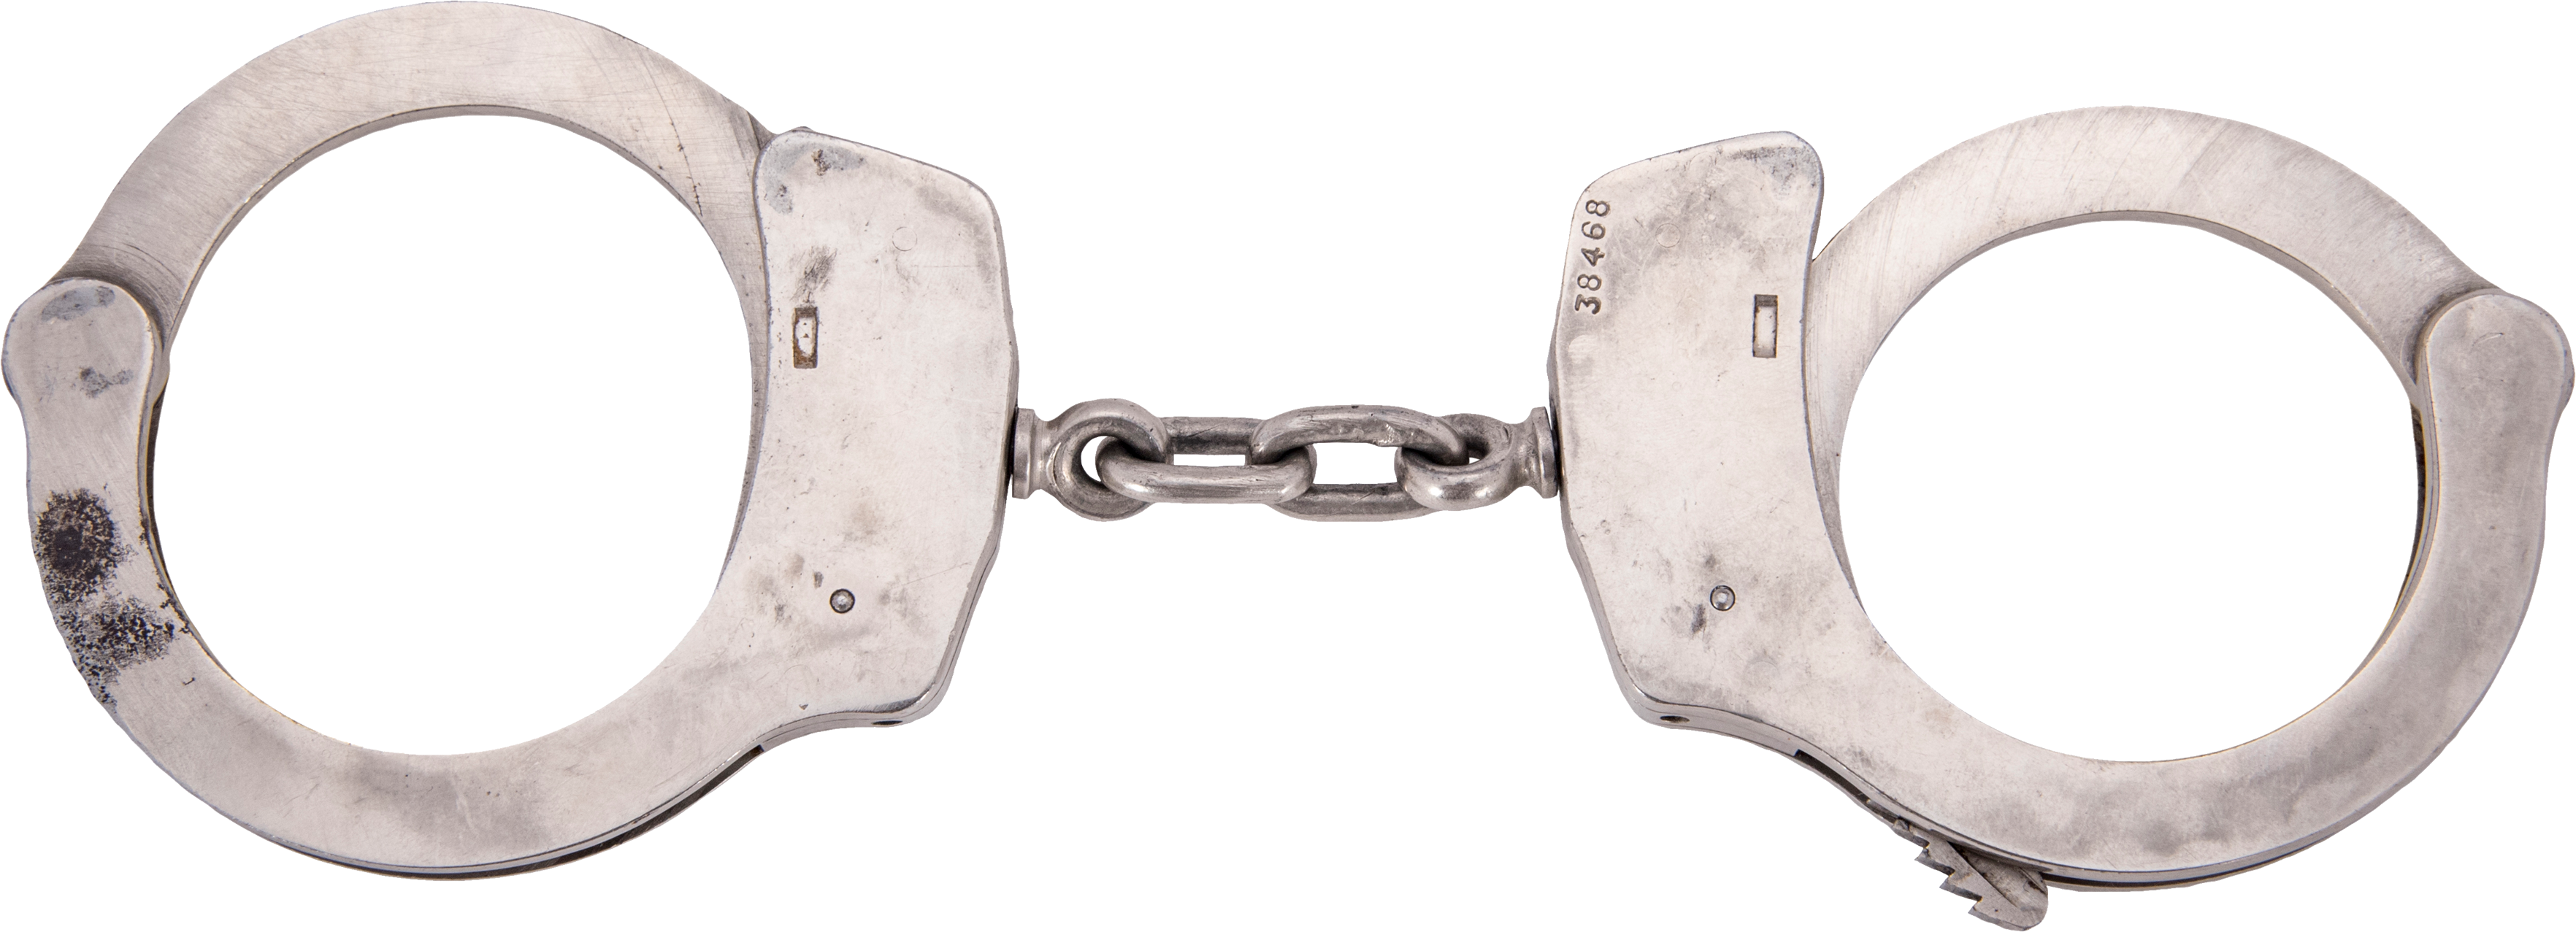 Png images free download. Handcuffs clipart chain